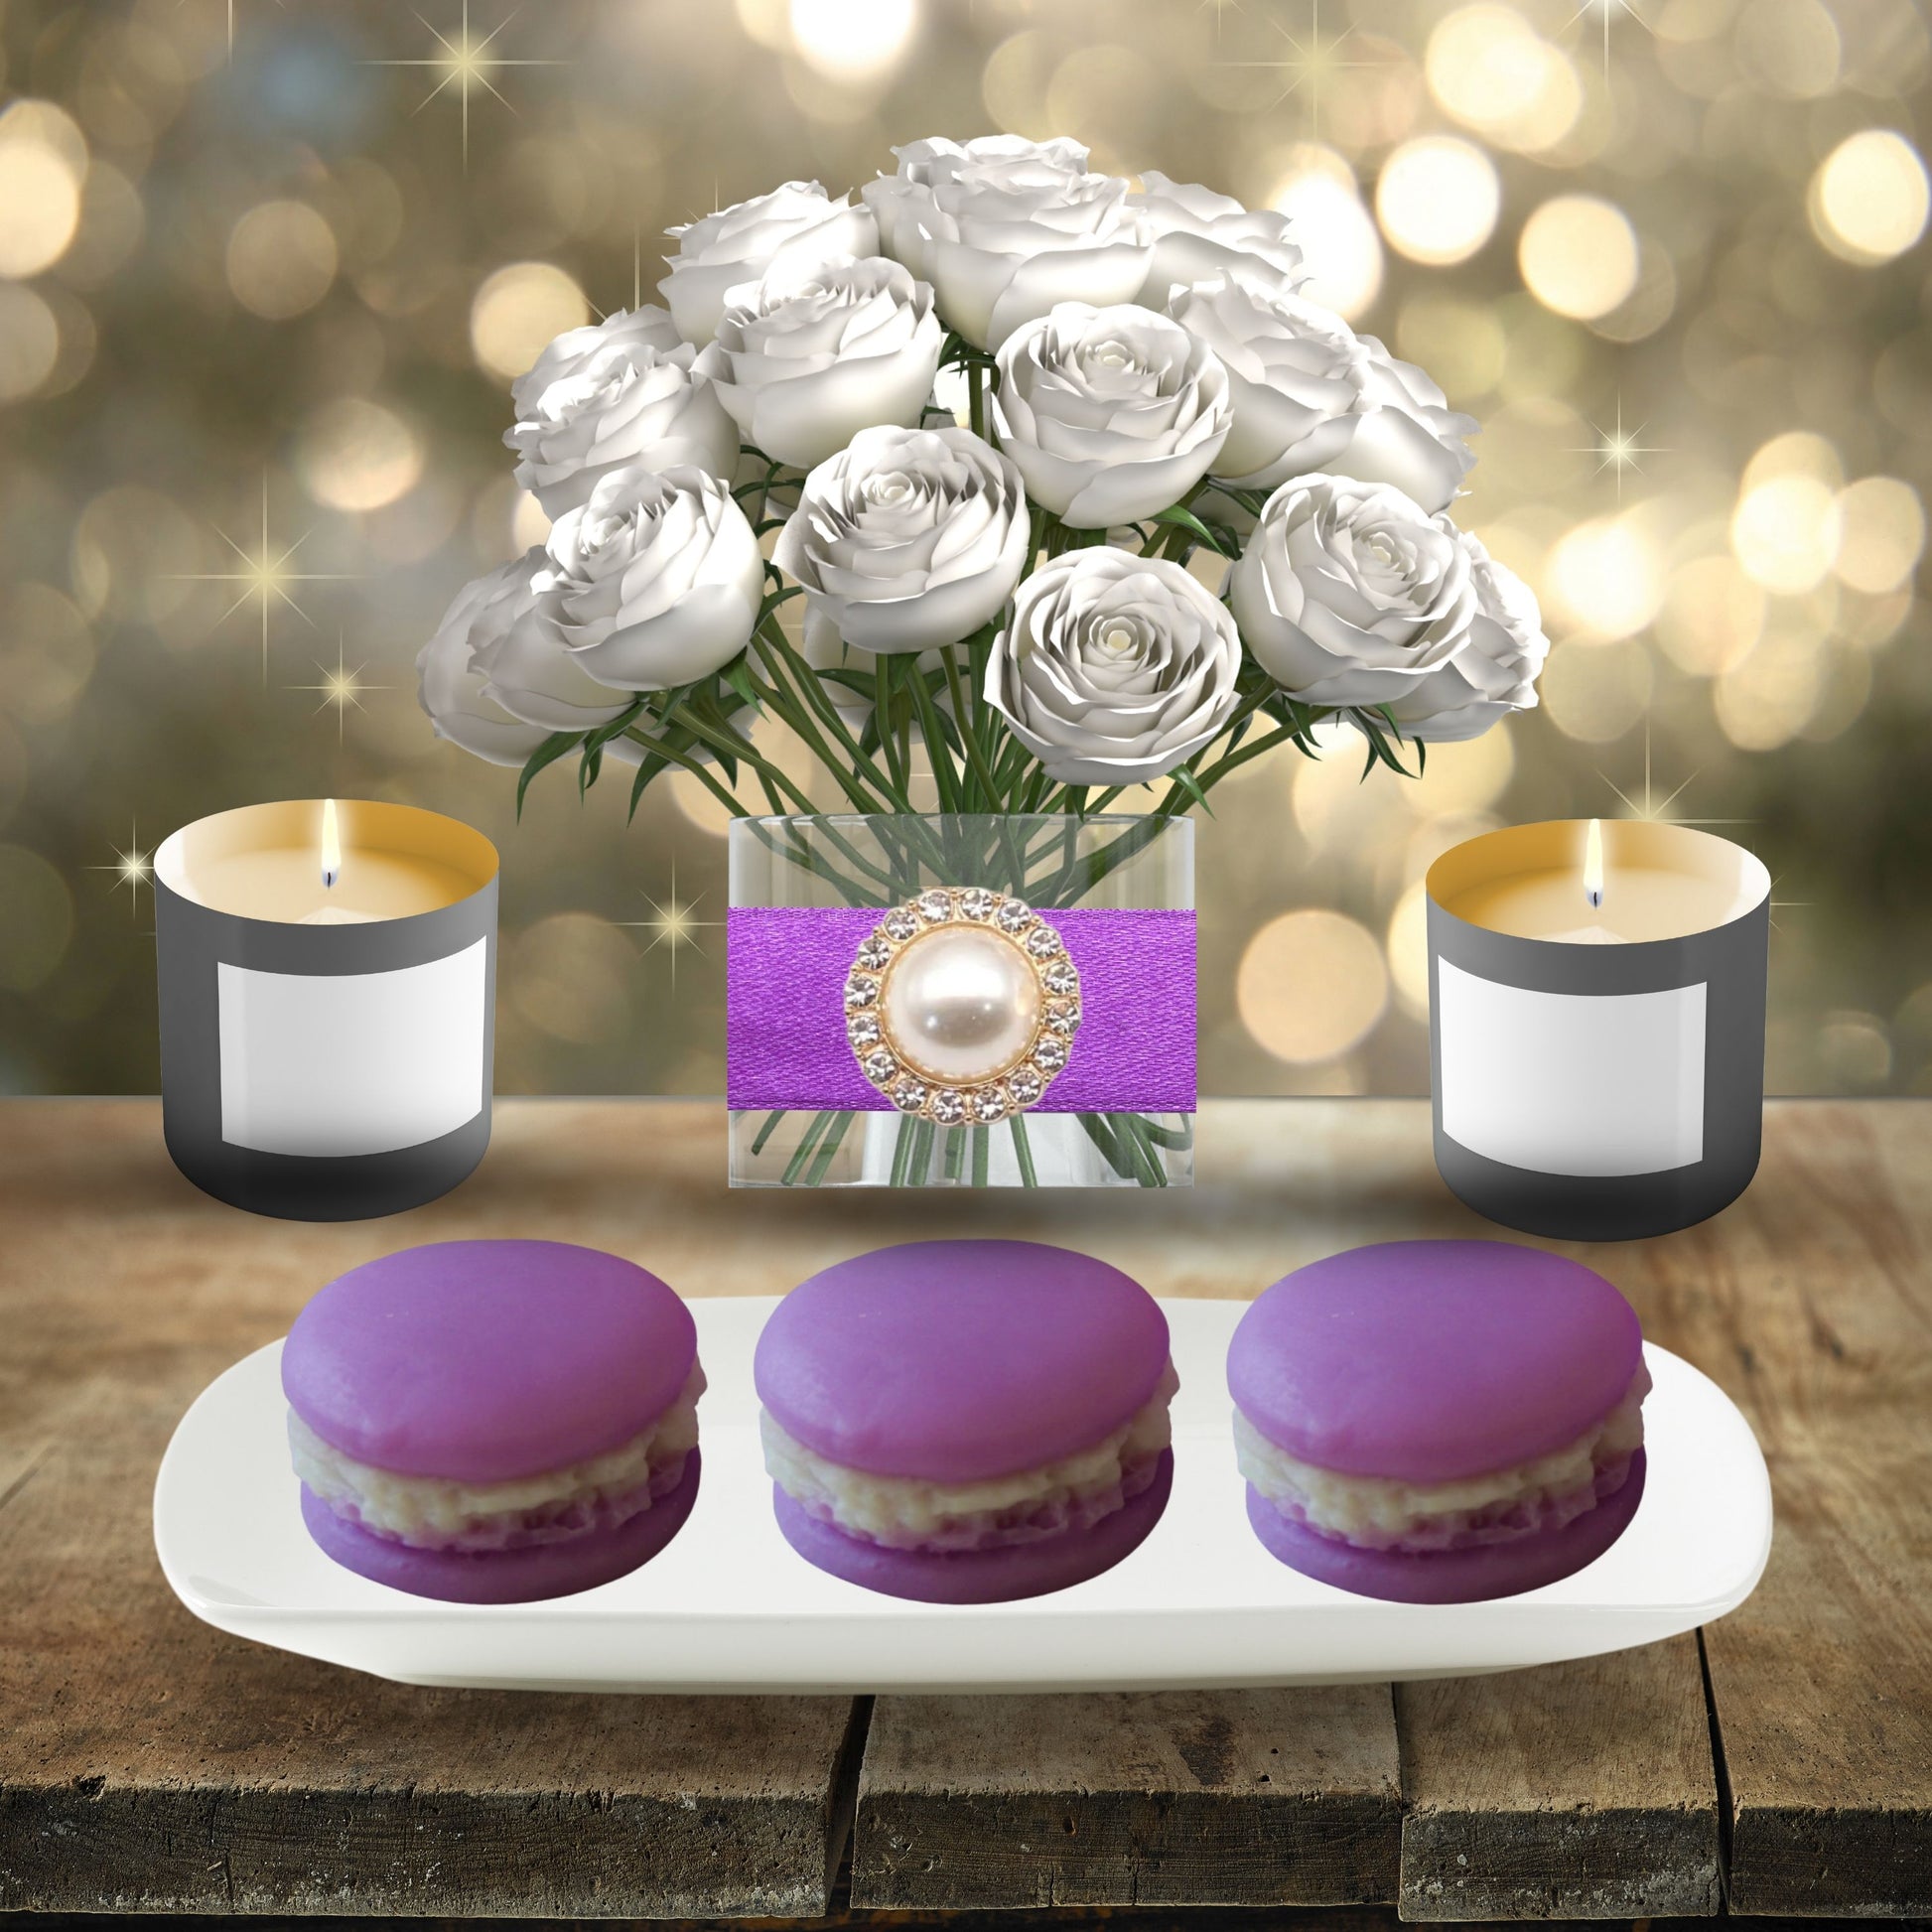 Cafe Delights Mini Macaron Scented Soy Wax Melts